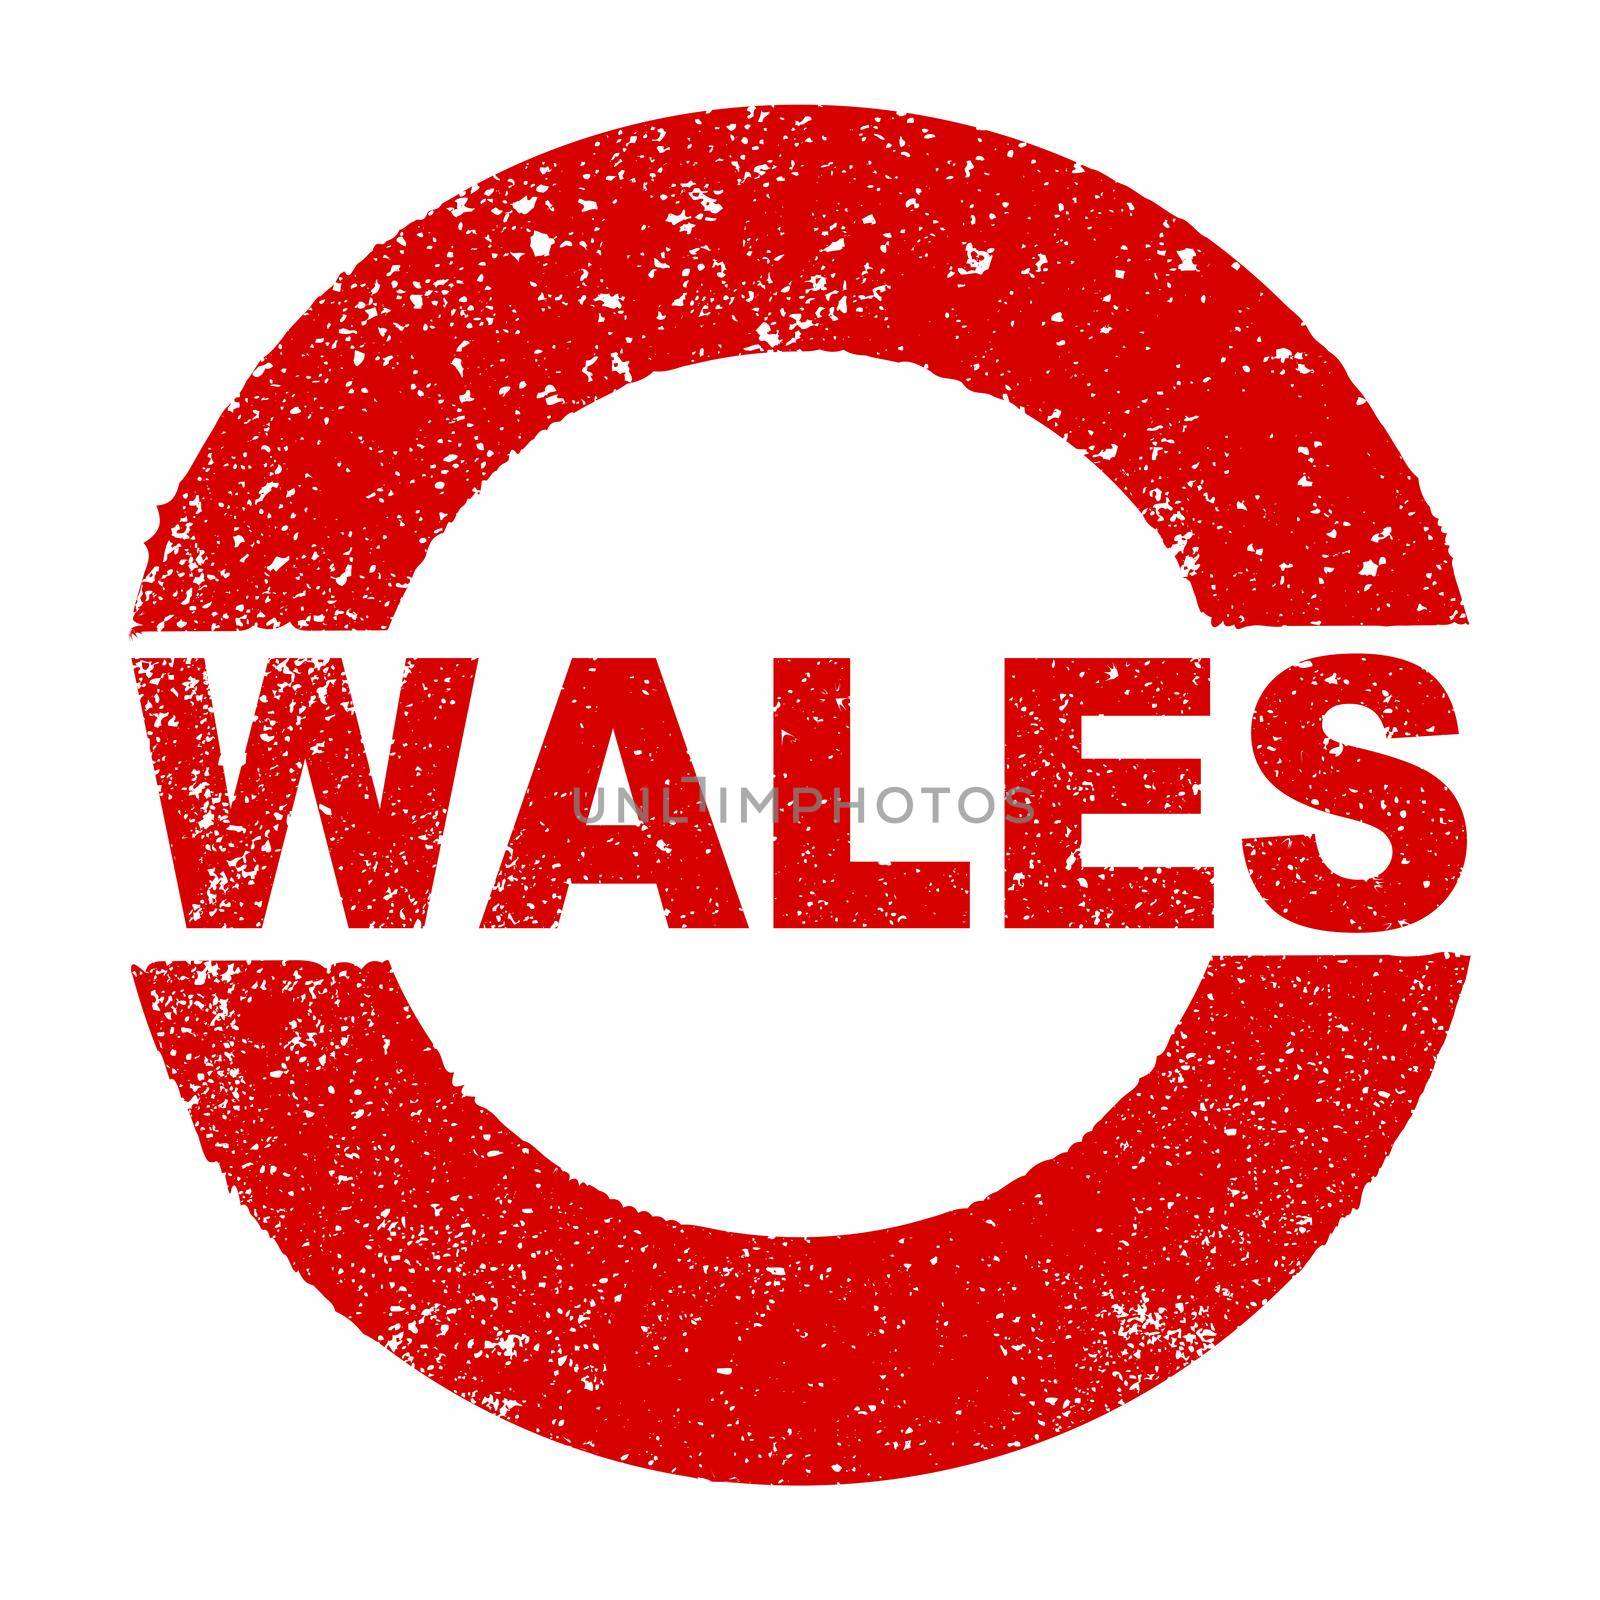 A grunge rubber ink stamp with the text Wales over a white background